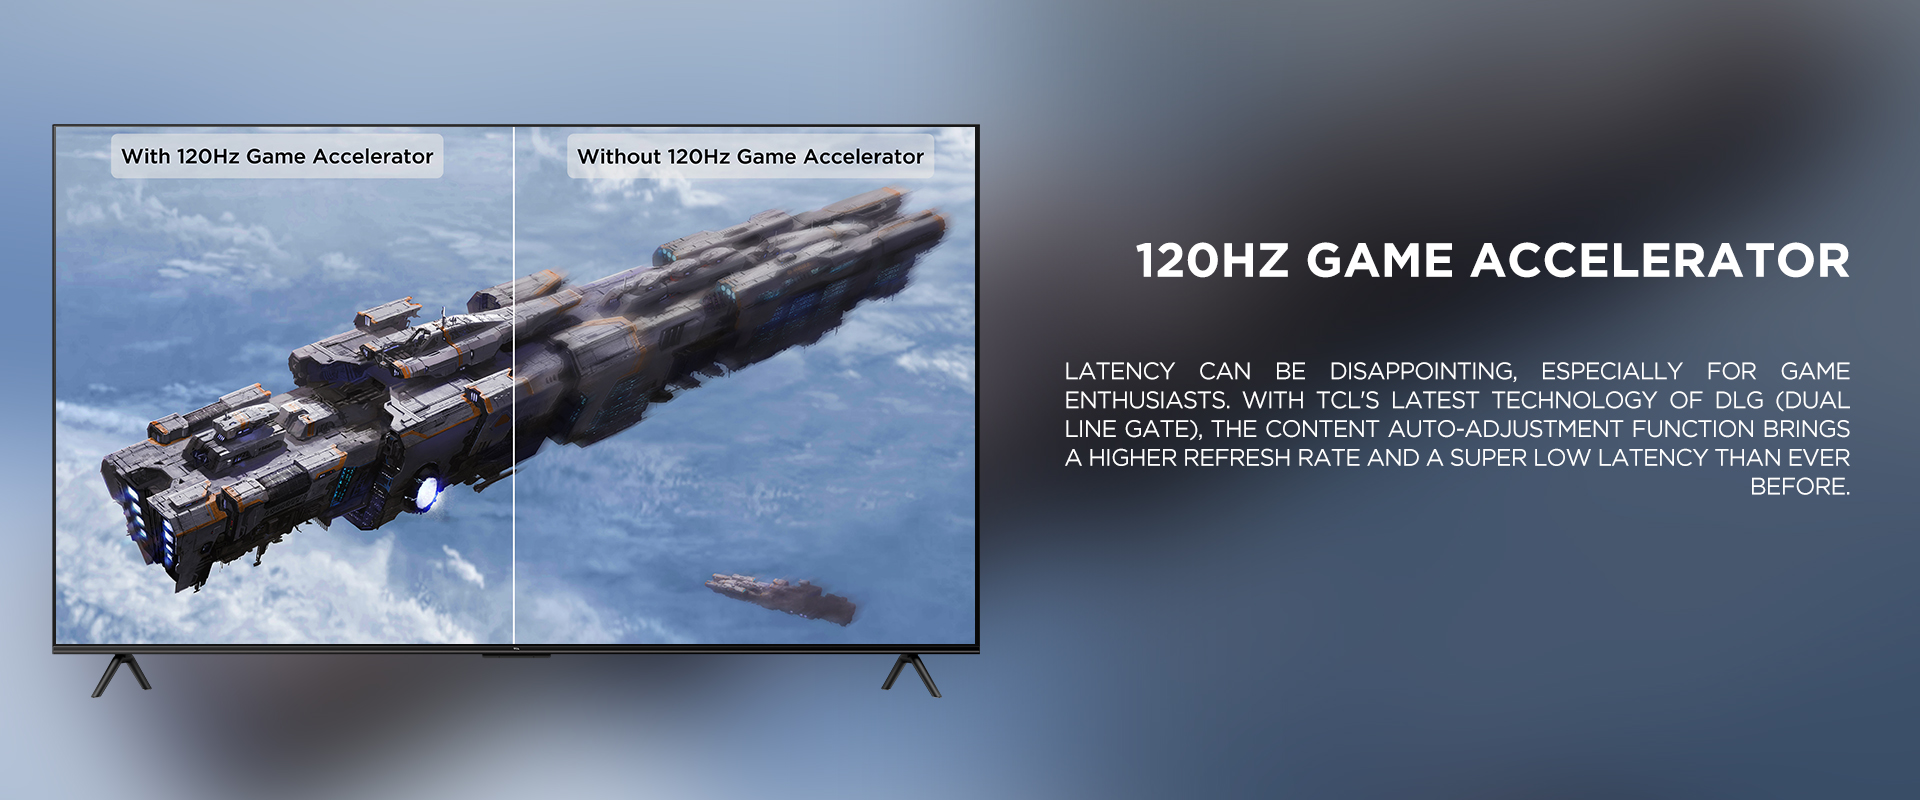 120Hz Game Accelerator - Latency can be disappointing, especially for game enthusiasts. With TCL's latest technology of DLG (Dual Line Gate), the content auto-adjustment function brings a higher refresh rate and a super low latency than ever before.